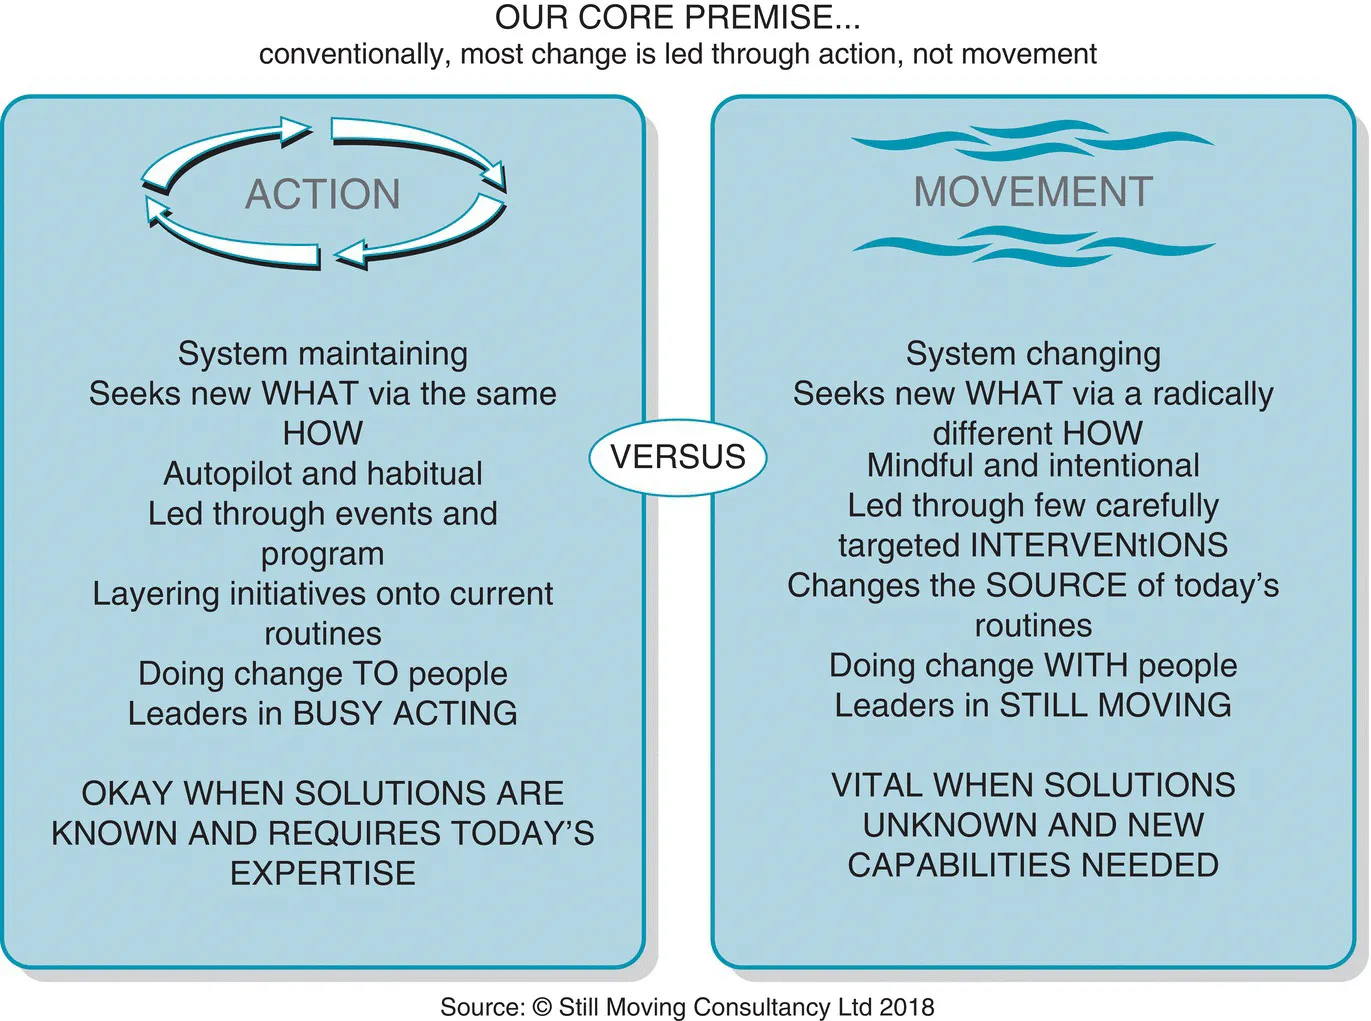 Framework of Still Moving Consultancy Ltd. listing the critical differences between action (left) and movement (right).